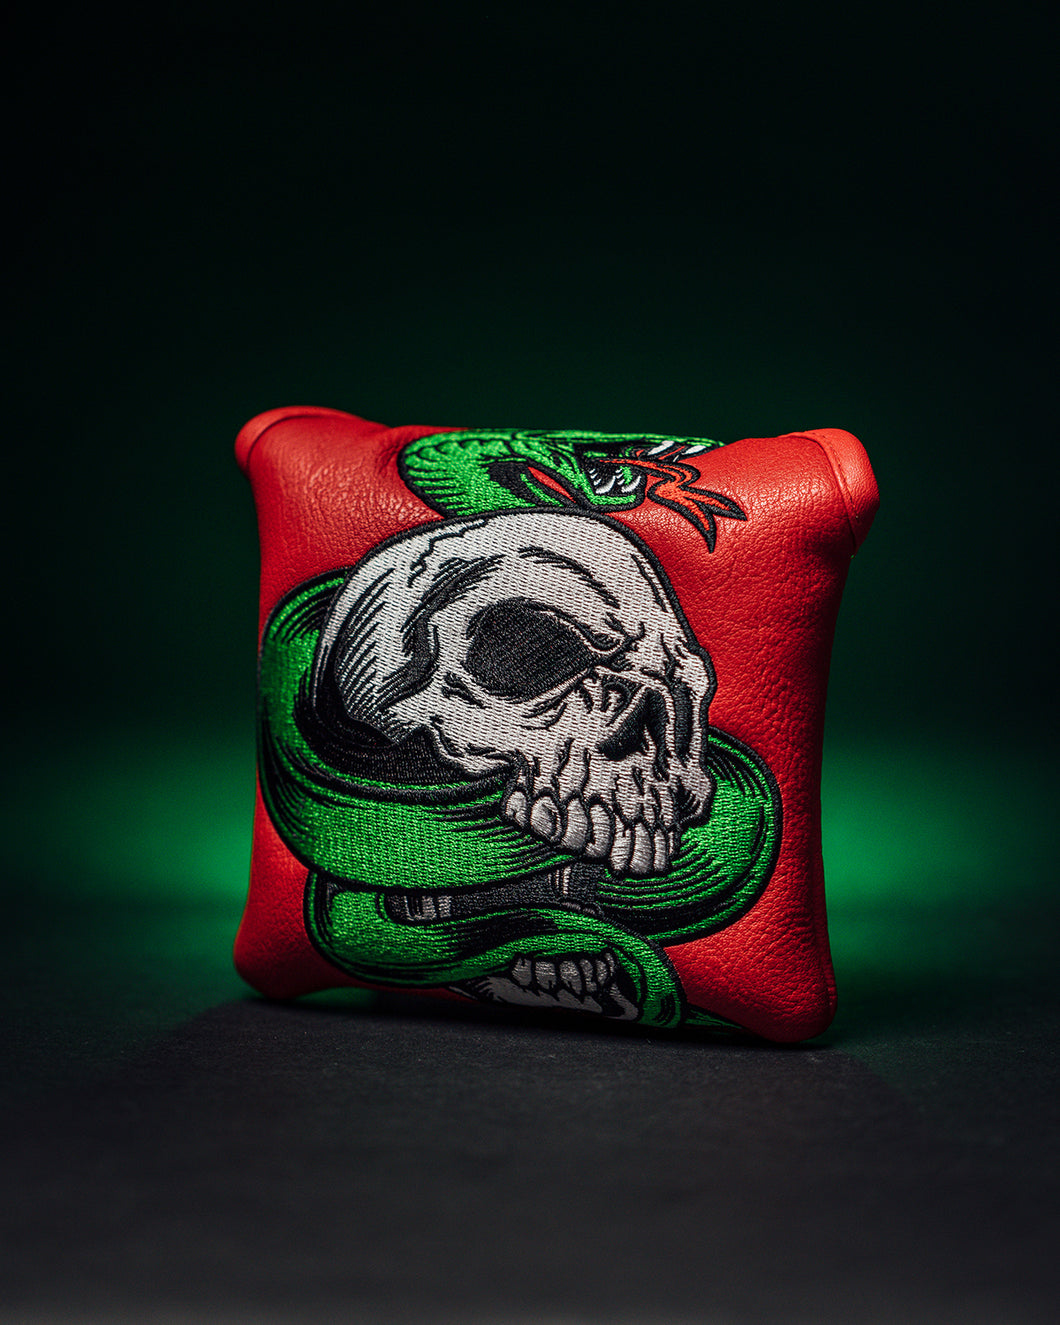 April HFL Monthly Cover Club 23 - Serpent Skull Putter Cover